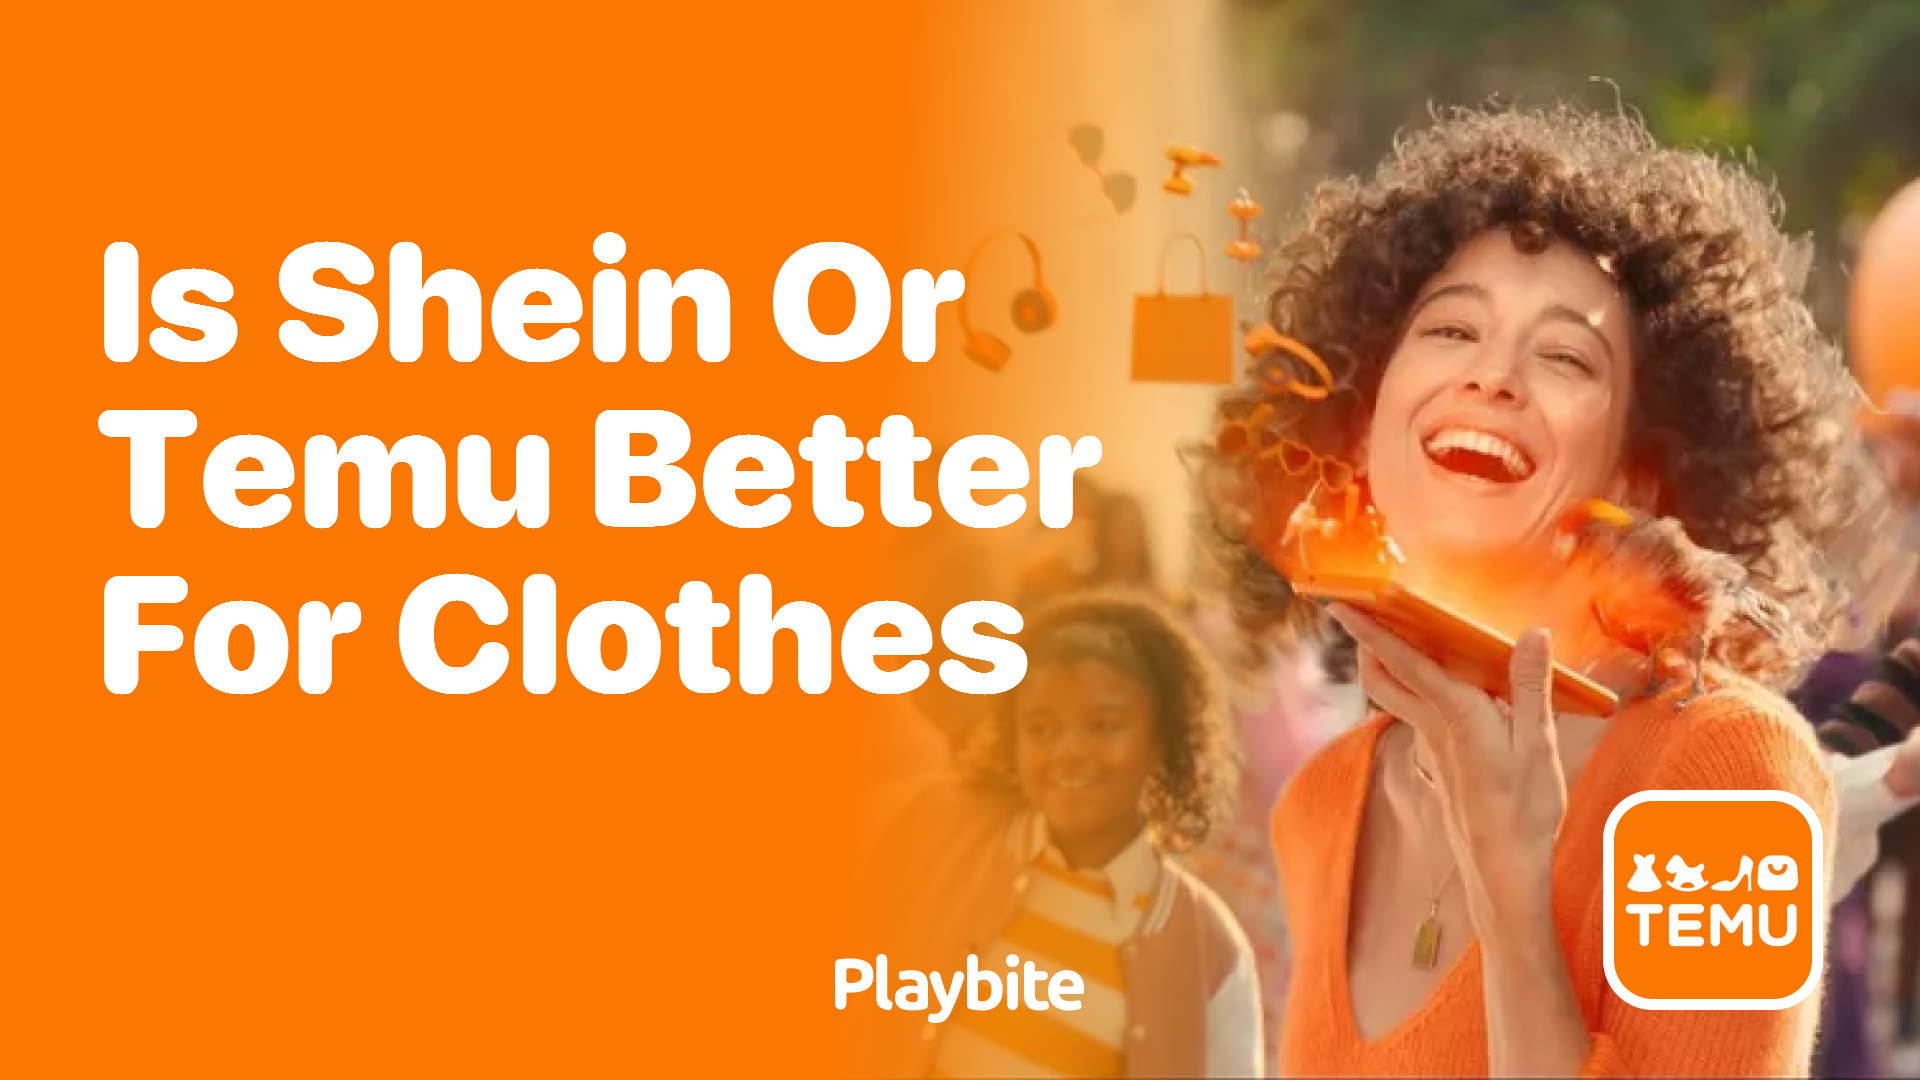 Is SHEIN a Good Clothing Company? - Playbite